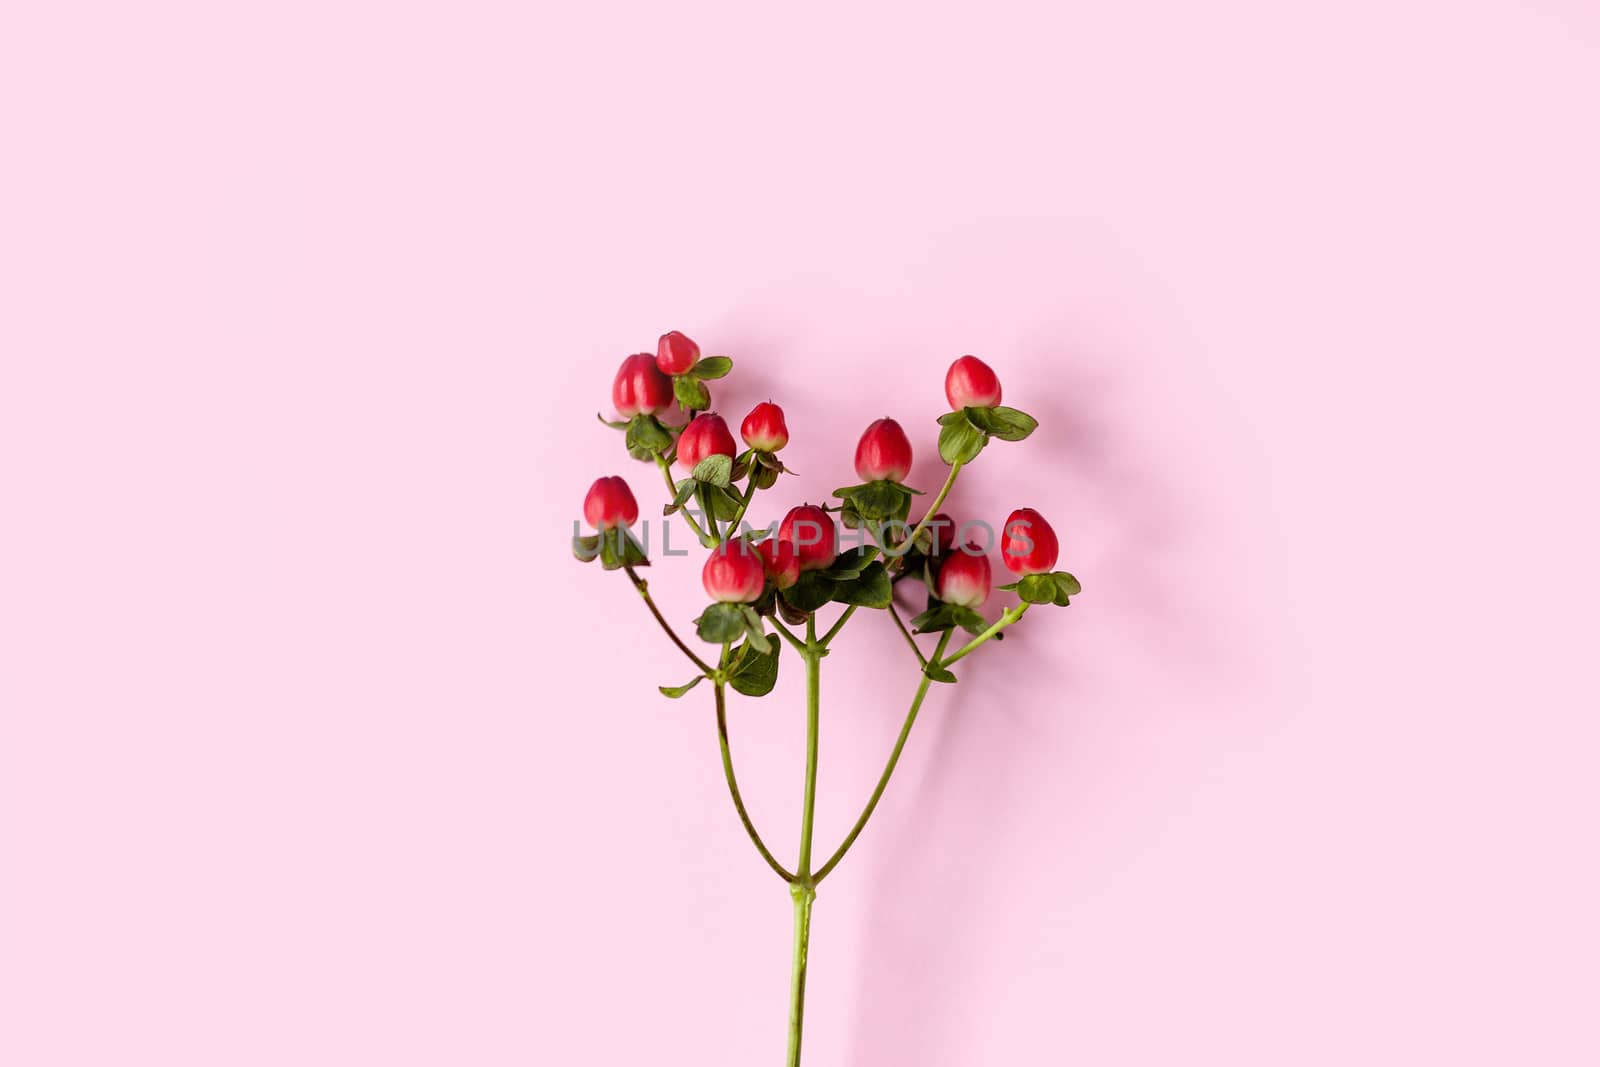 Hypericum perforatum, Red St. John's wort on a pink background, banner, postcard, advertising, homeopathy concept, alternative medicine, red fruit on a branch, background, design, copy space.